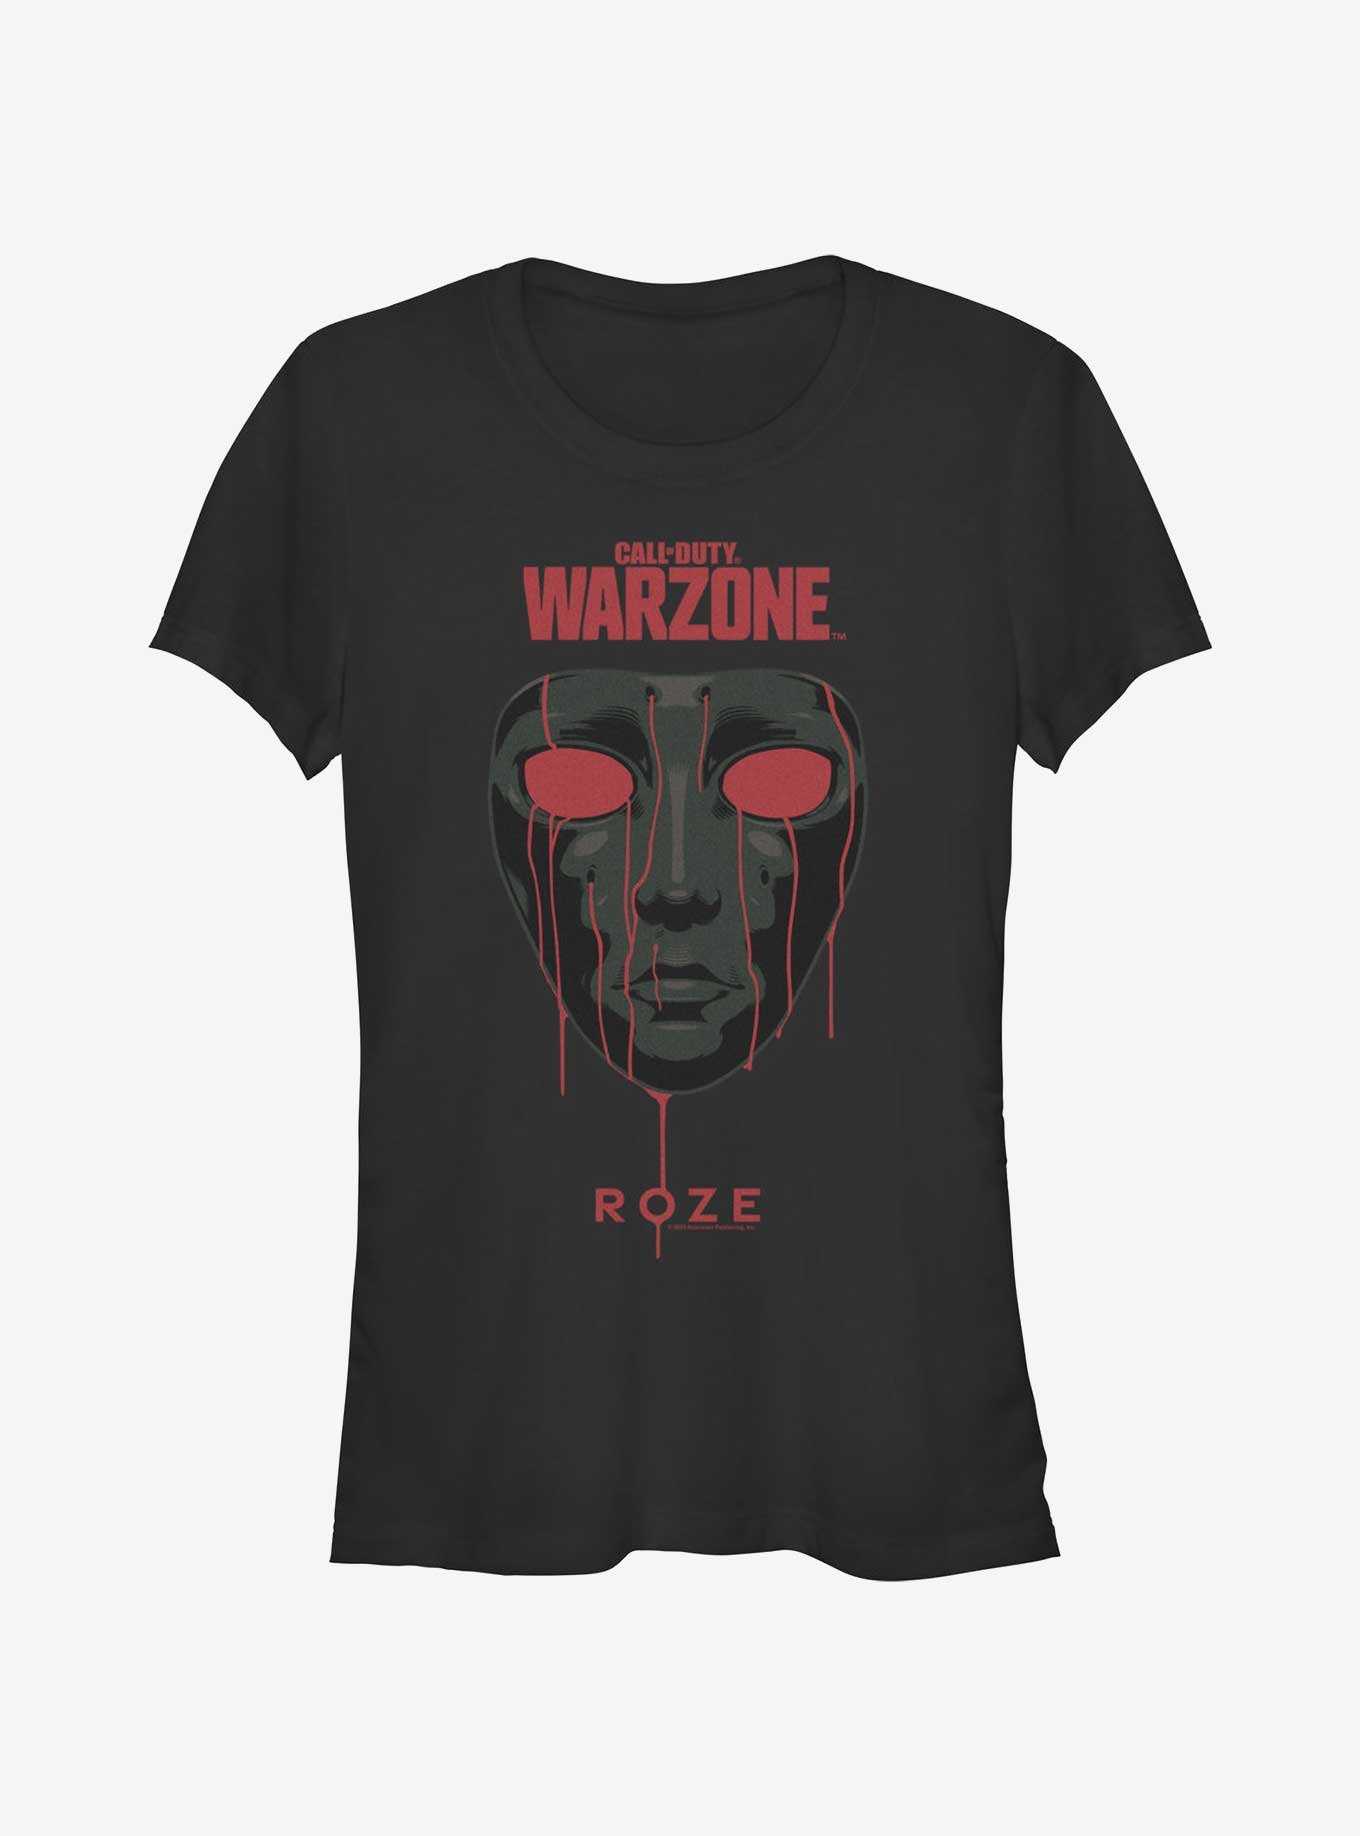 Call of Duty: Warzone Teary Roze Girls T-Shirt, , hi-res